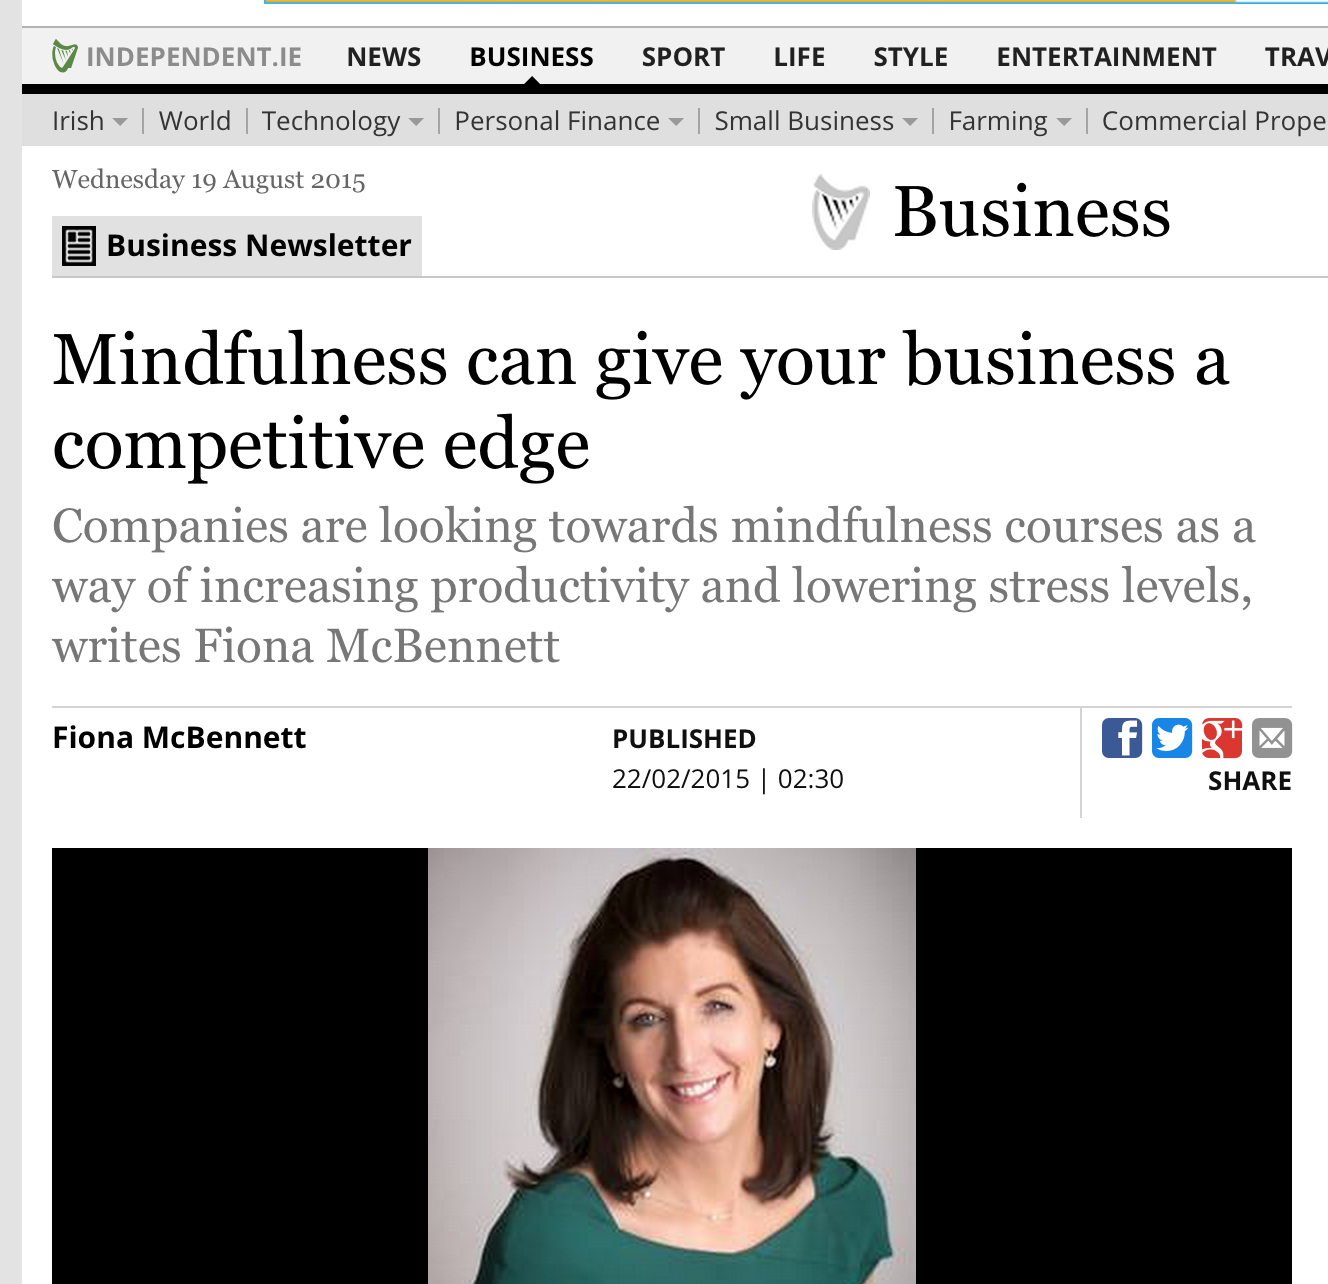 Sunday Independent : Mindfulness can give your business a competitive edge